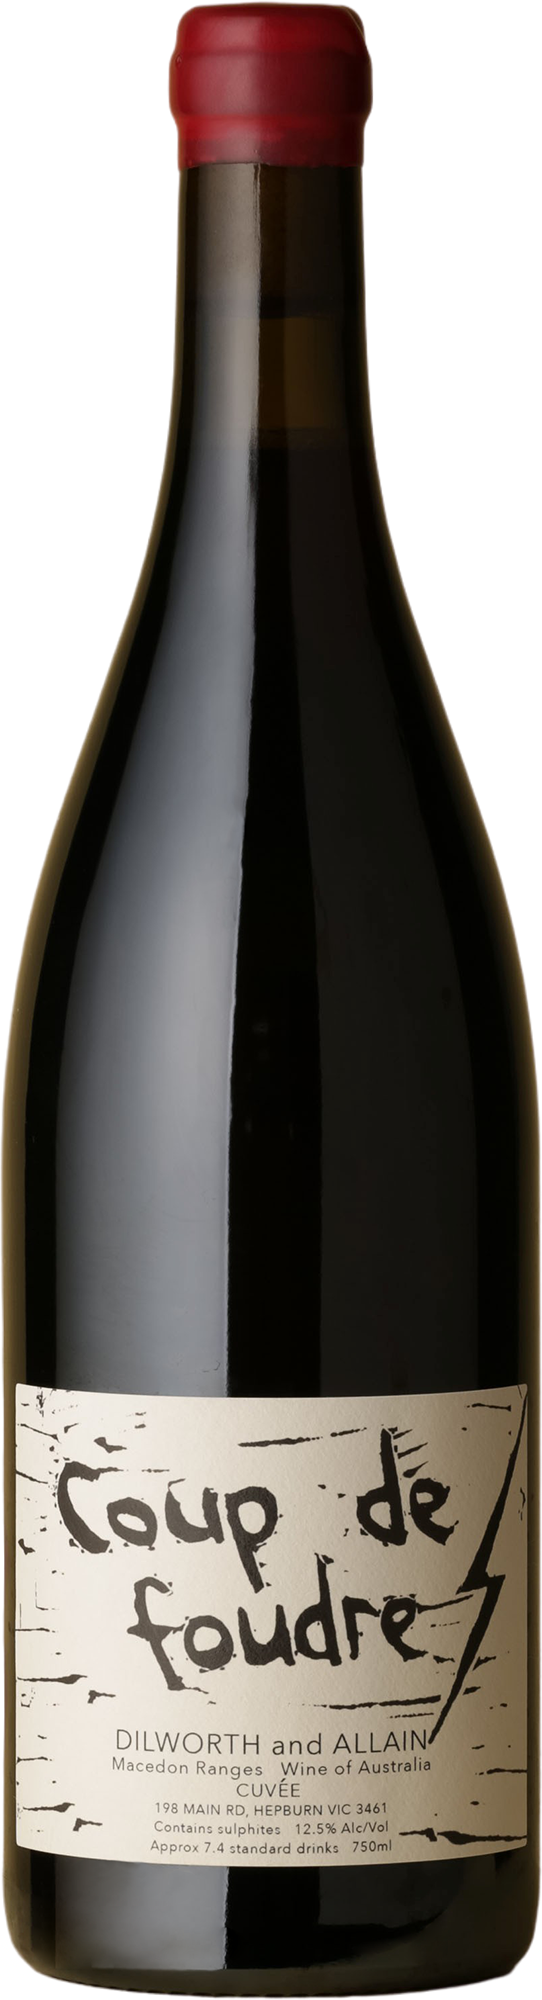 Dilworth and Allain - Coup de Foudre Cuvée 3 Pinot Noir / Chardonnay 2019 Red Wine